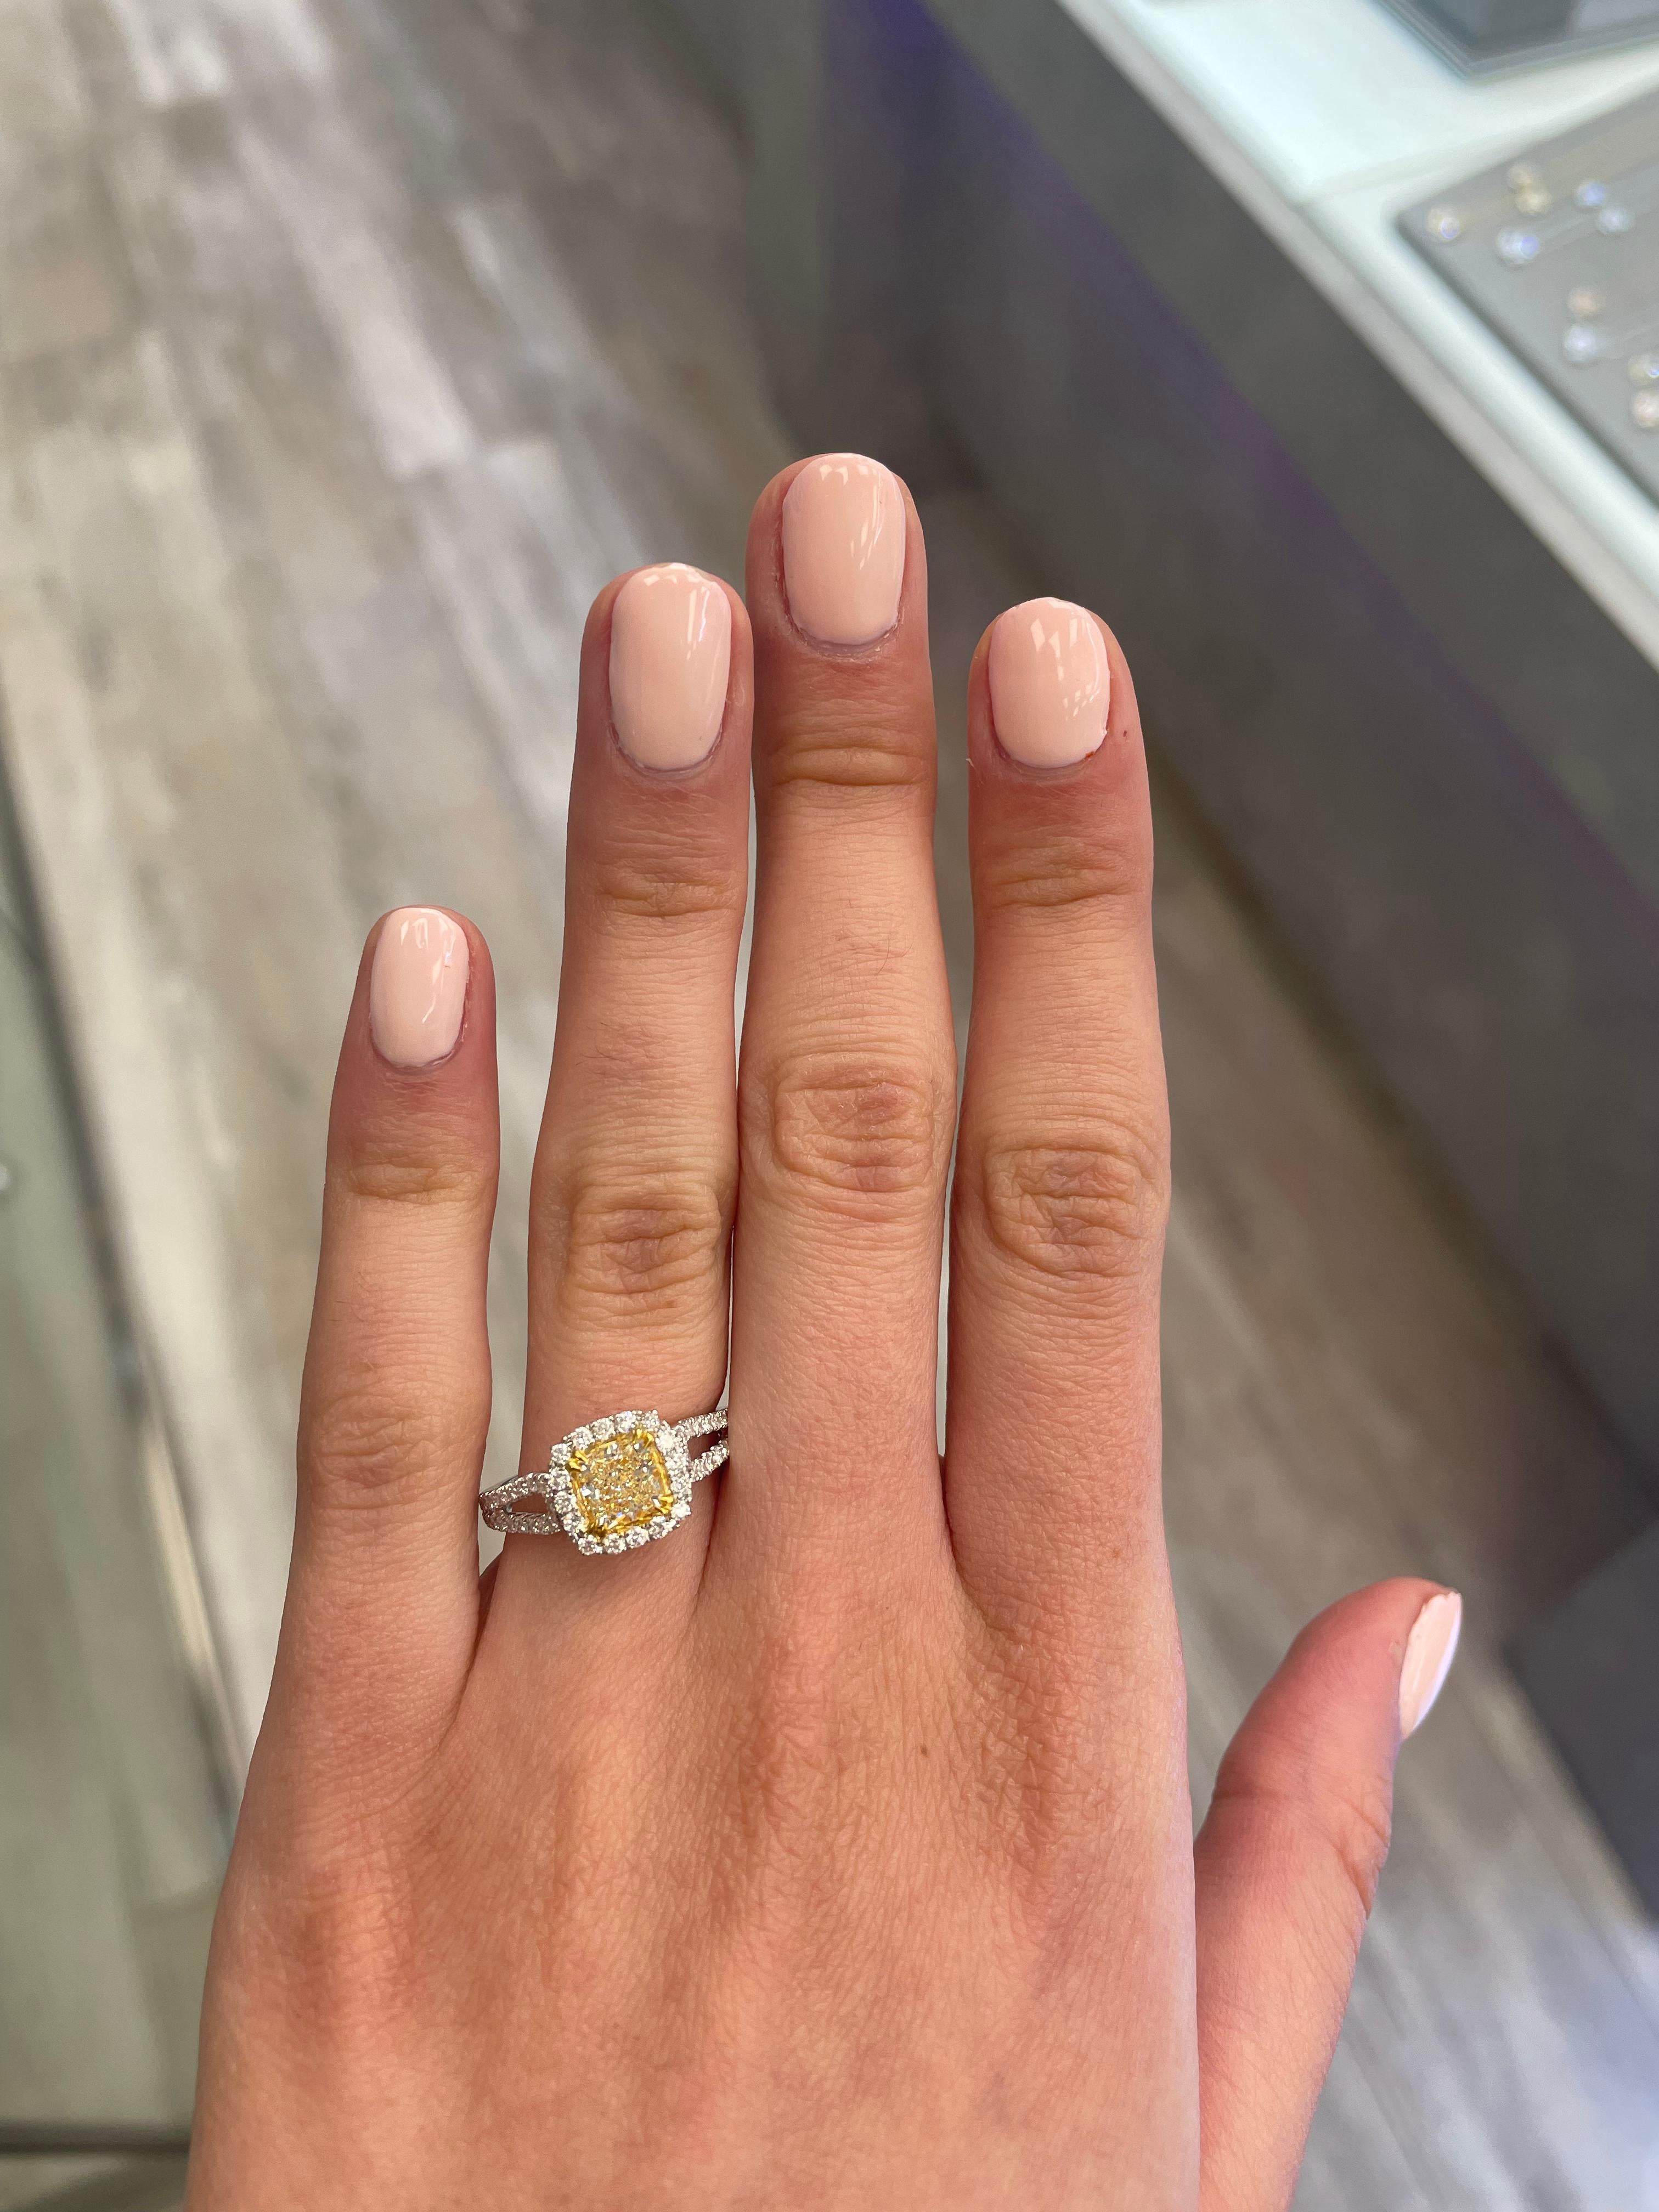 Stunning modern EGL certified yellow diamond with halo ring, two-tone 18k yellow and white gold, split shank. By Alexander Beverly Hills
1.48 carats total diamond weight.
1.05 carat cushion cut Fancy Yellow color and VS1 clarity diamond, EGL graded.